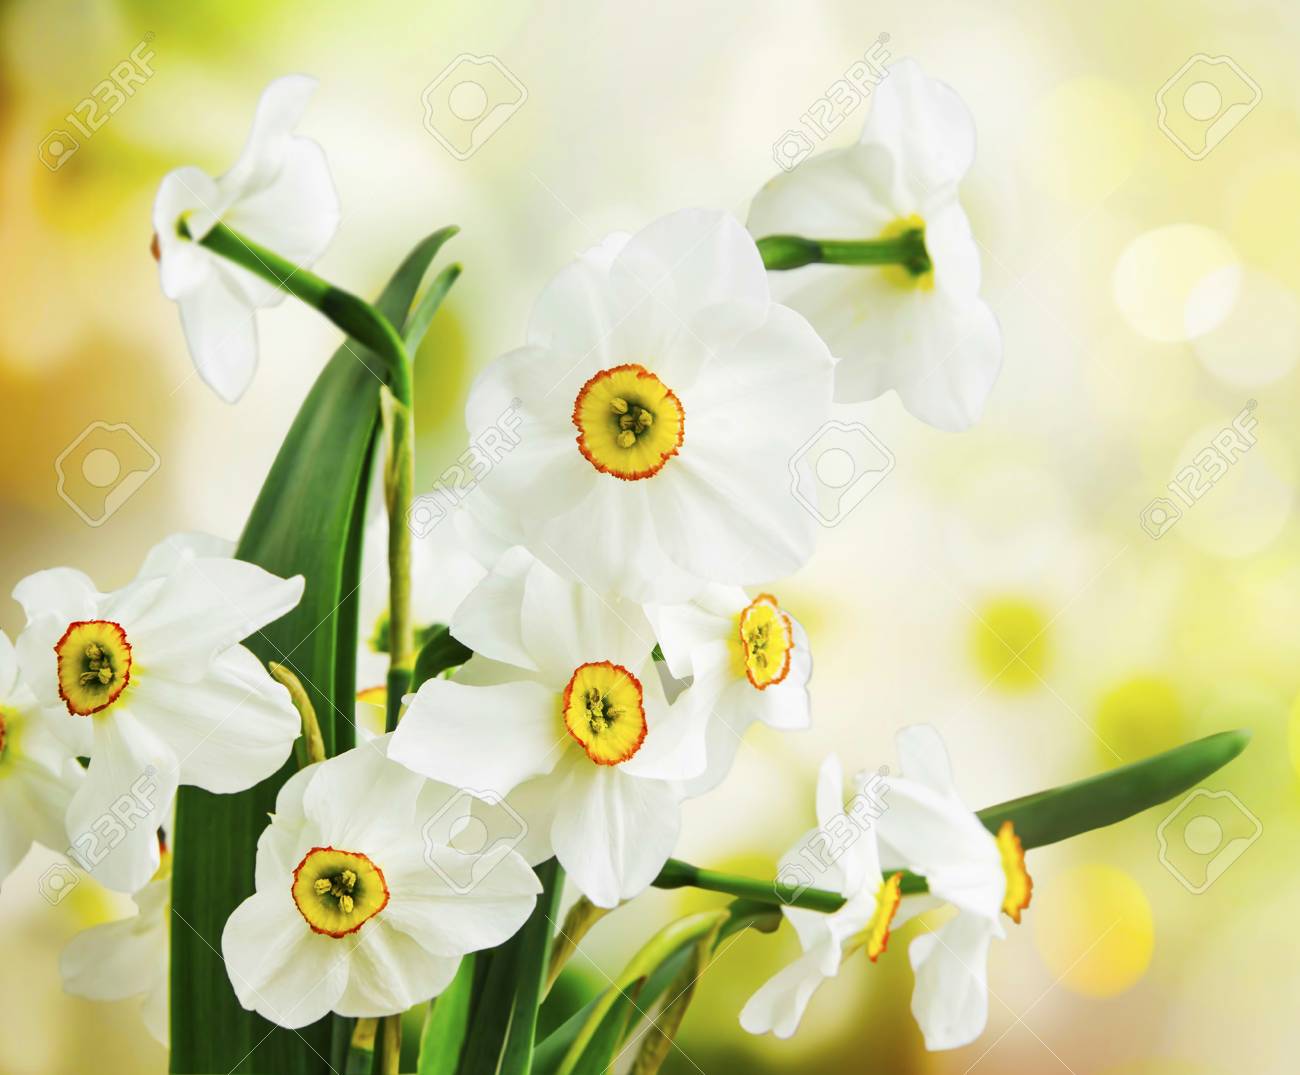 Spring White Daffodils Bouquet On Bright Springtime Background